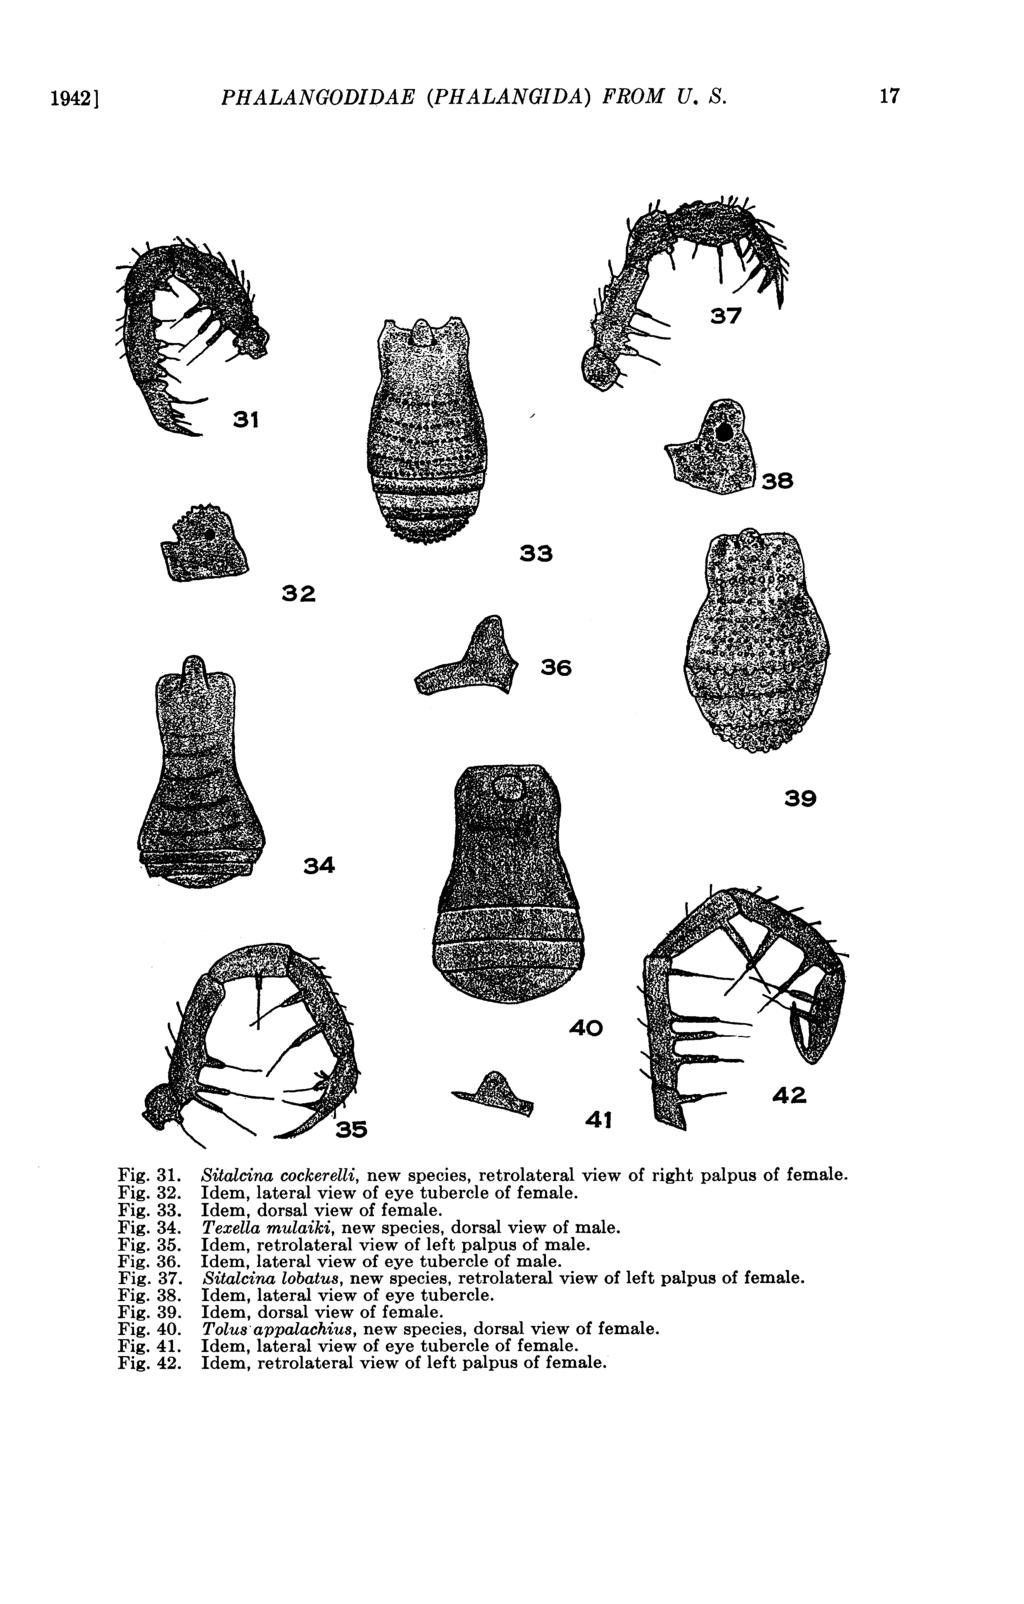 19421] PHALANGODDAE (PHALANGDA) FROM U. S. 17 > 3 8~~~~3 32 33 39 ( w3~4 i 42 35 ~~~41 Fig. 31. Sitalcina cockerelli, new species, retrolateral view of right palpus of female. Fig. 32. dem, lateral view of eye tubercle of female.